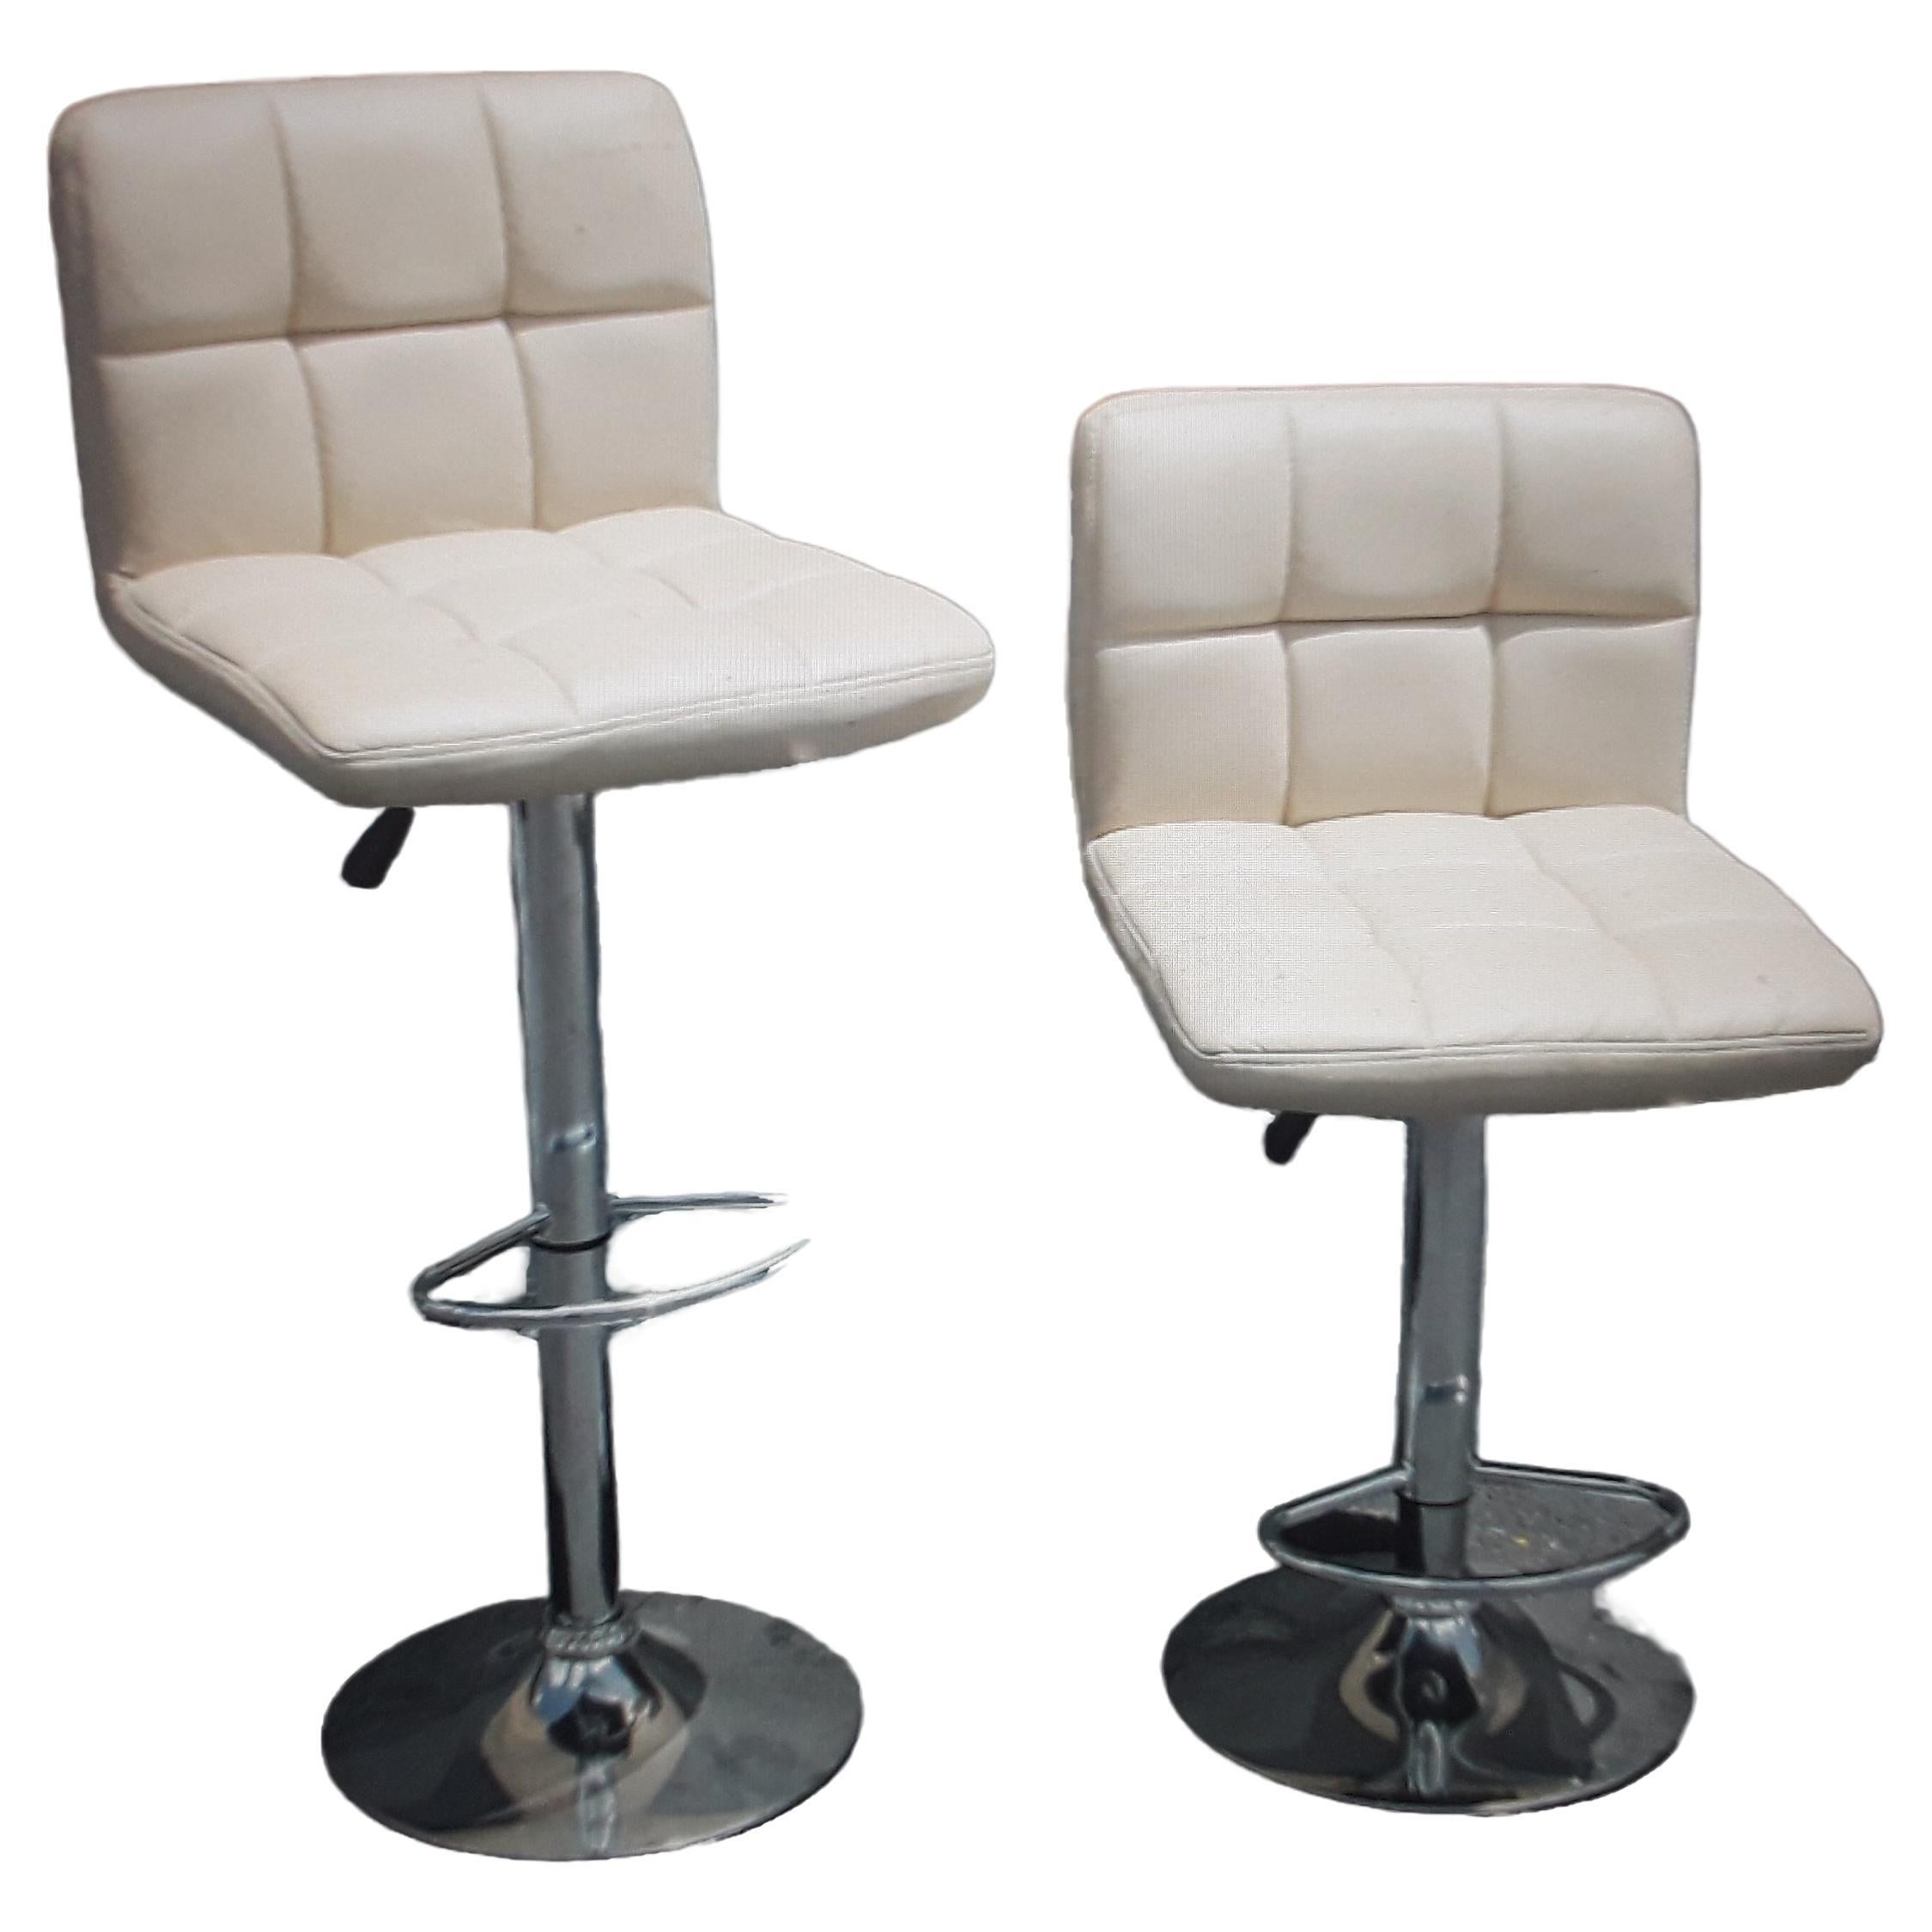 Pair Mid Century Modern Faux White Leather Bar Stools. Adjustable height.